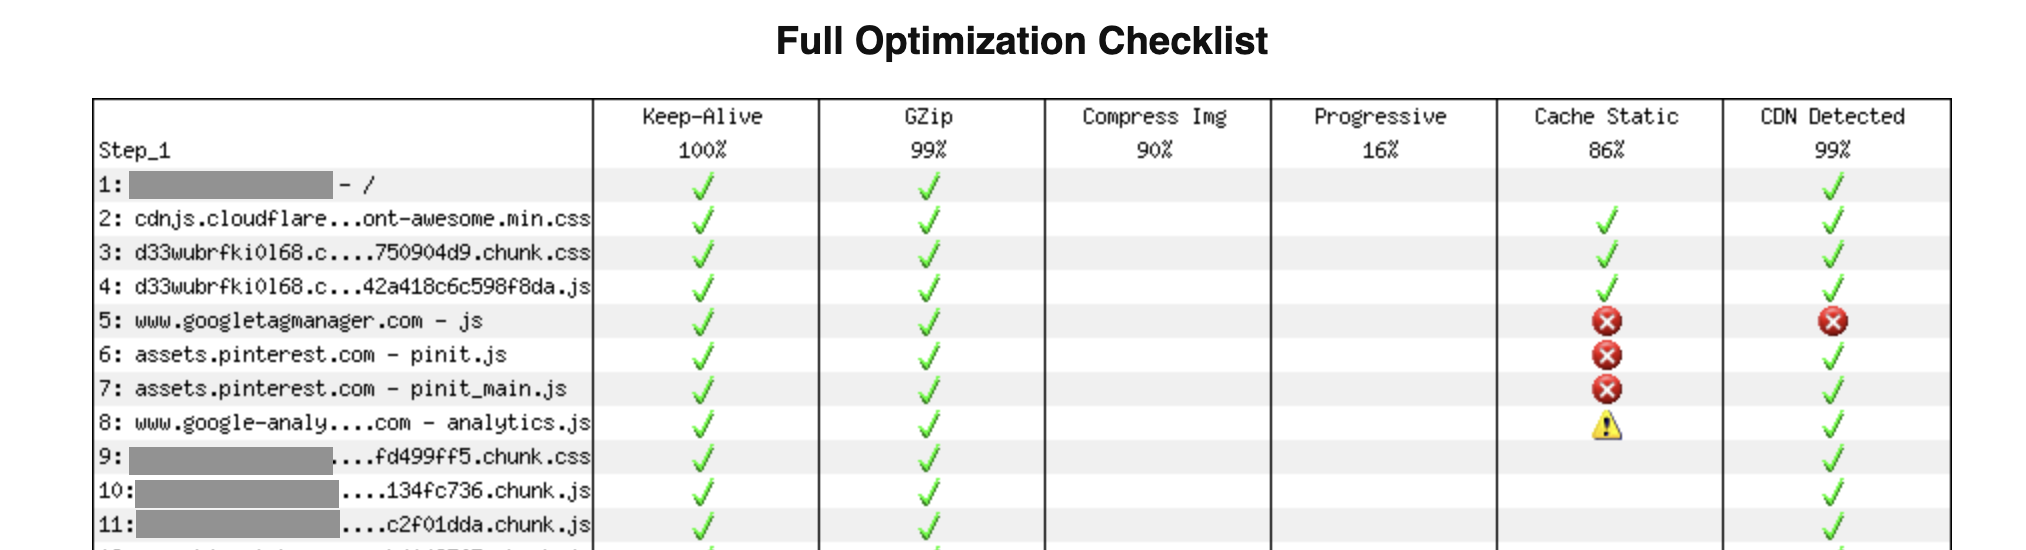 Waterfall view for optimization checklist